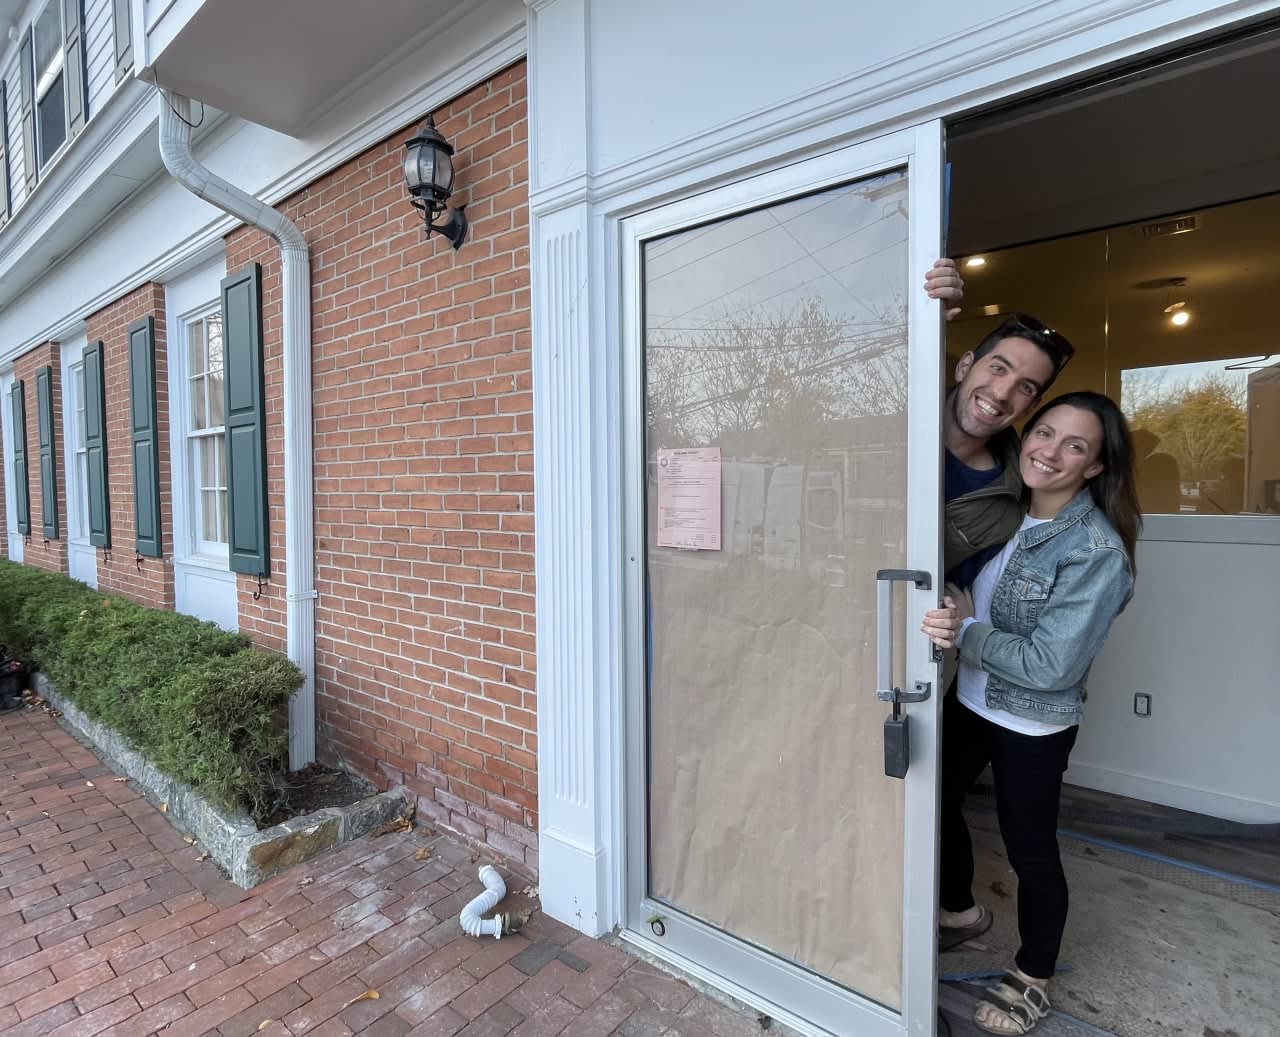 Owners Anthony and Lauren Chillemi are pictured with their business, the Bedford Village Flower Shoppe, which will soon open.